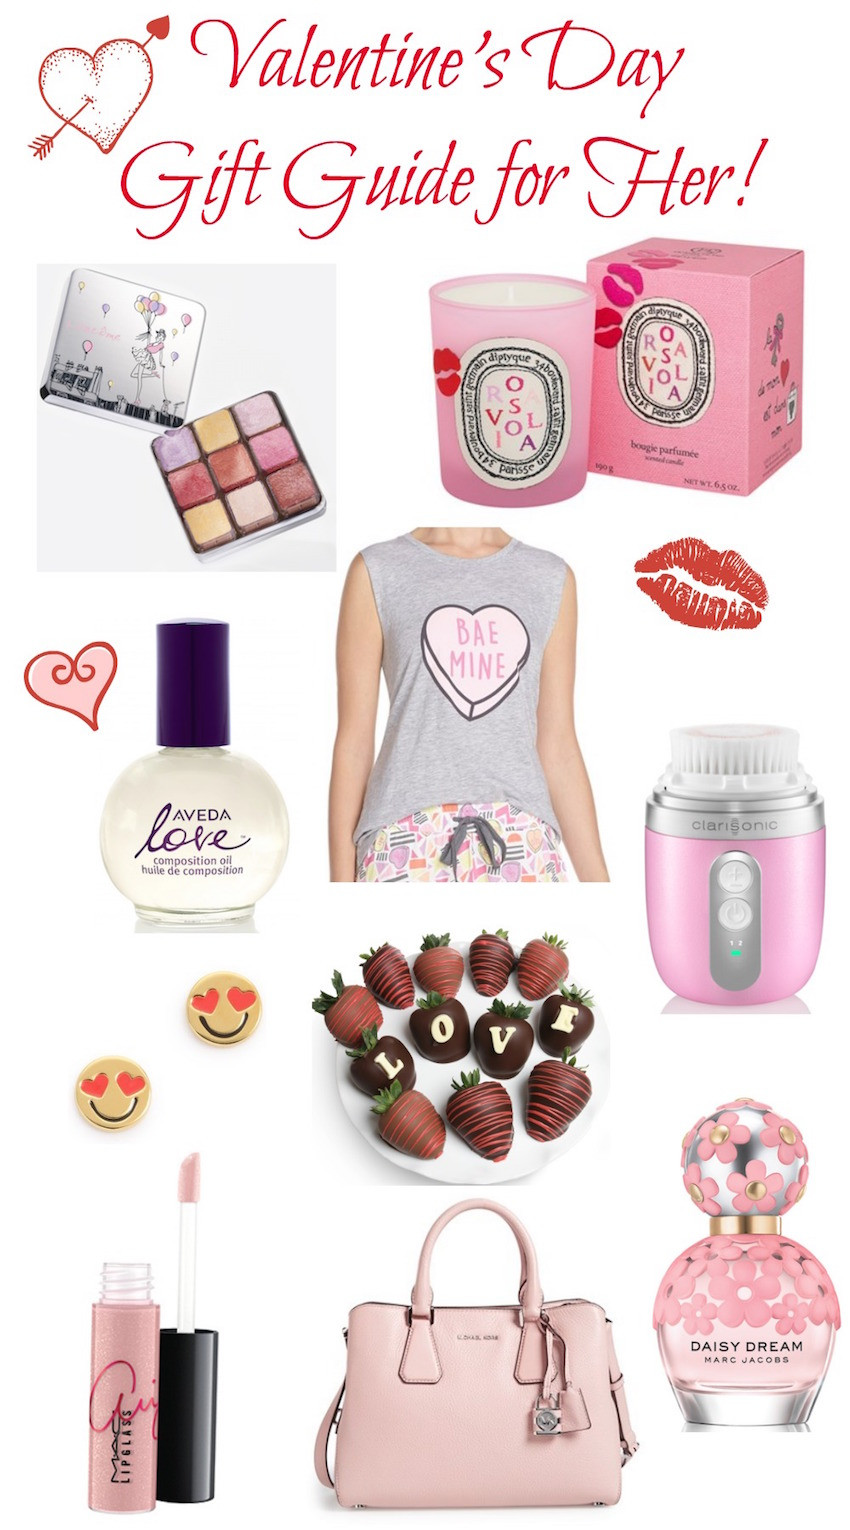 Valentines Day Gifts 2016
 Valentine’s Day Gifts for Her